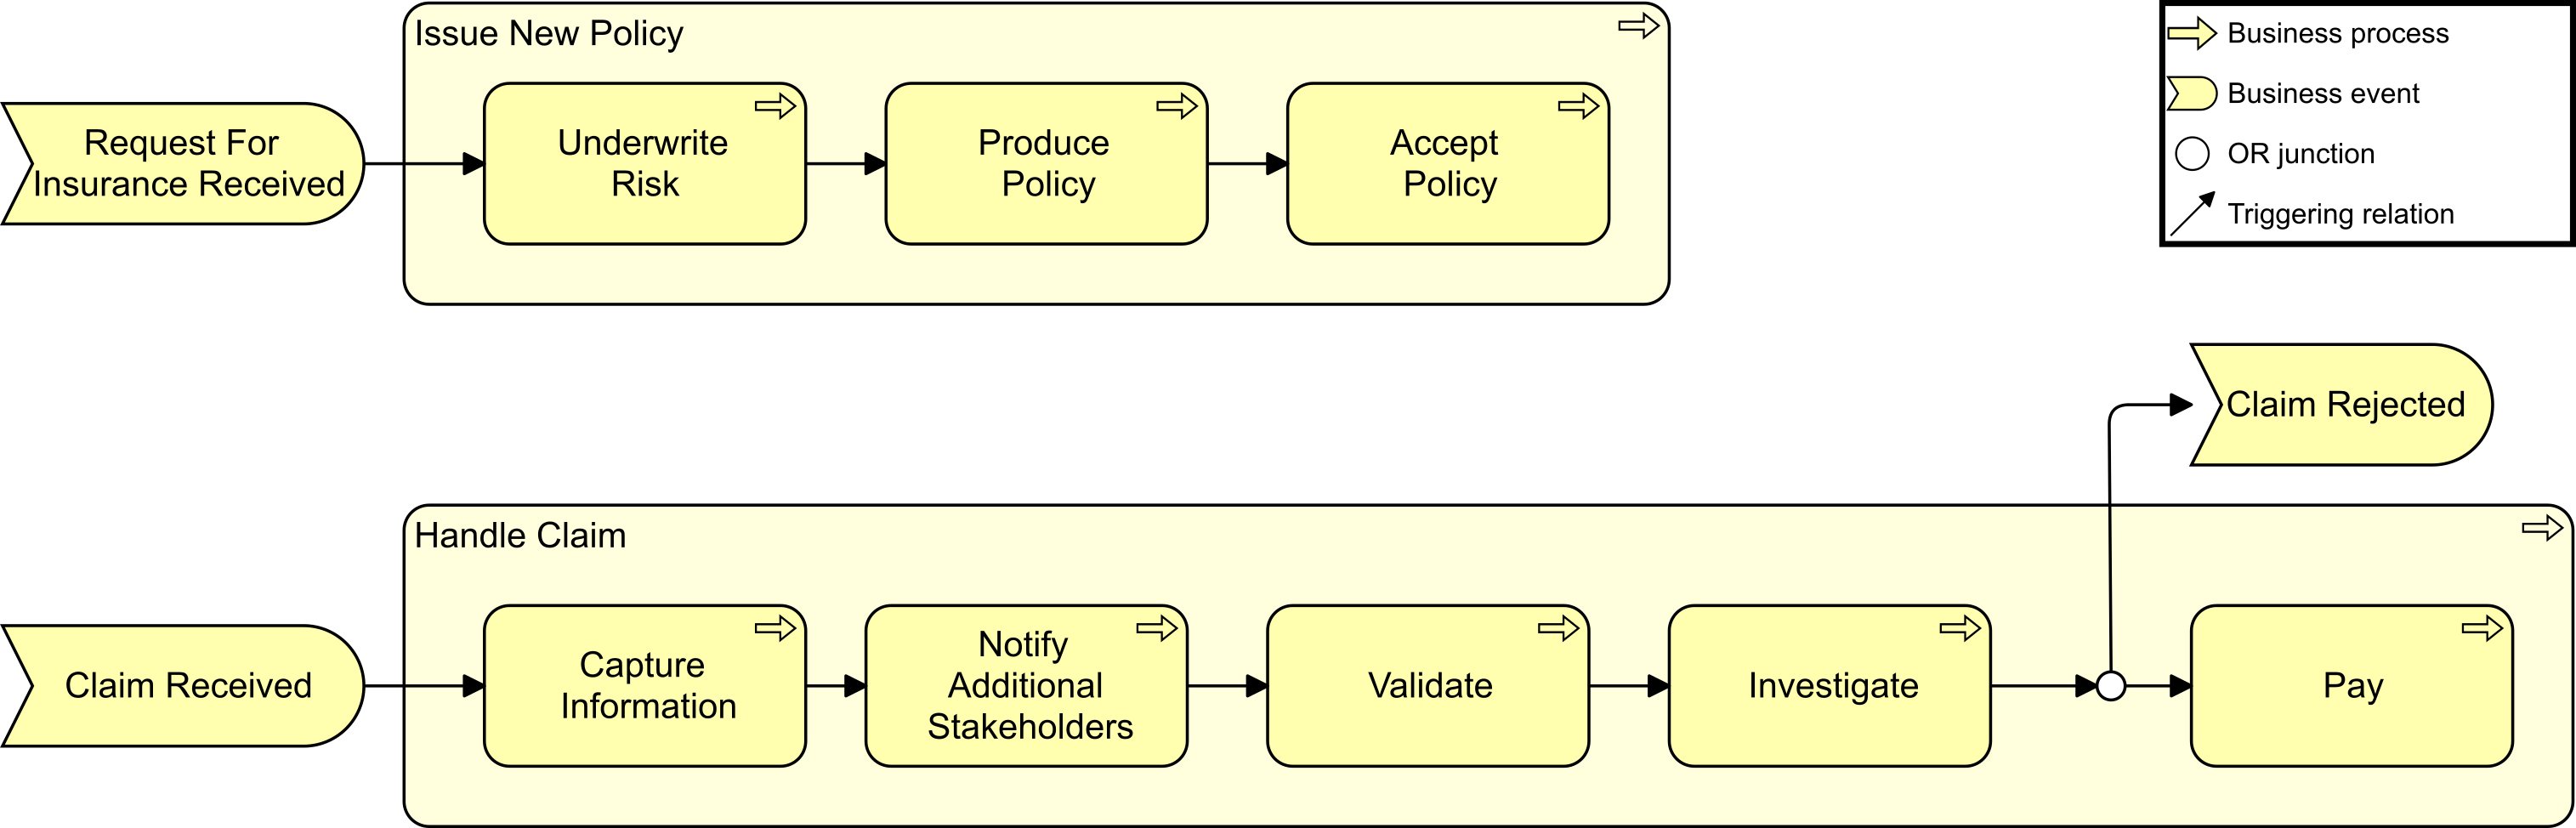 examples of business processes